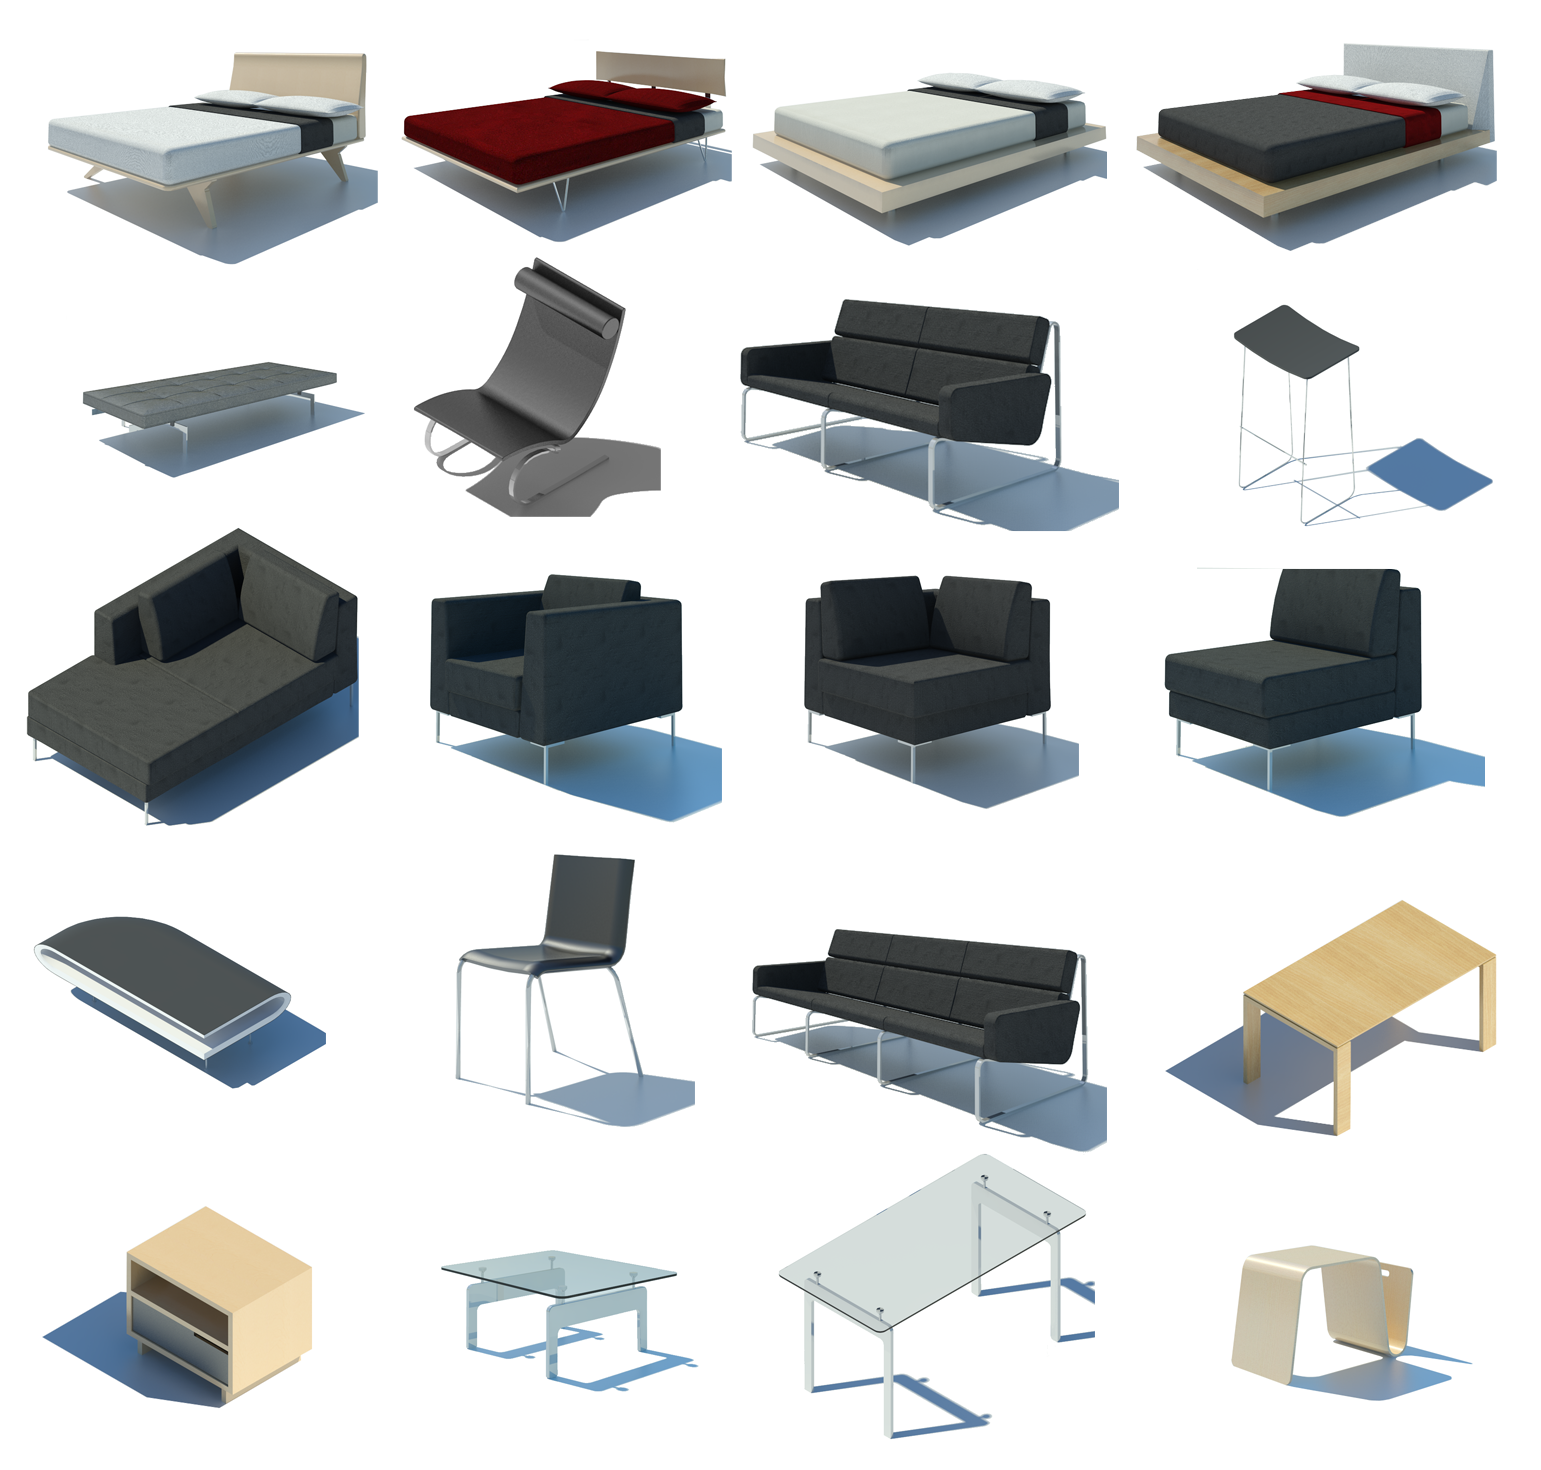 revit library 2019 free download